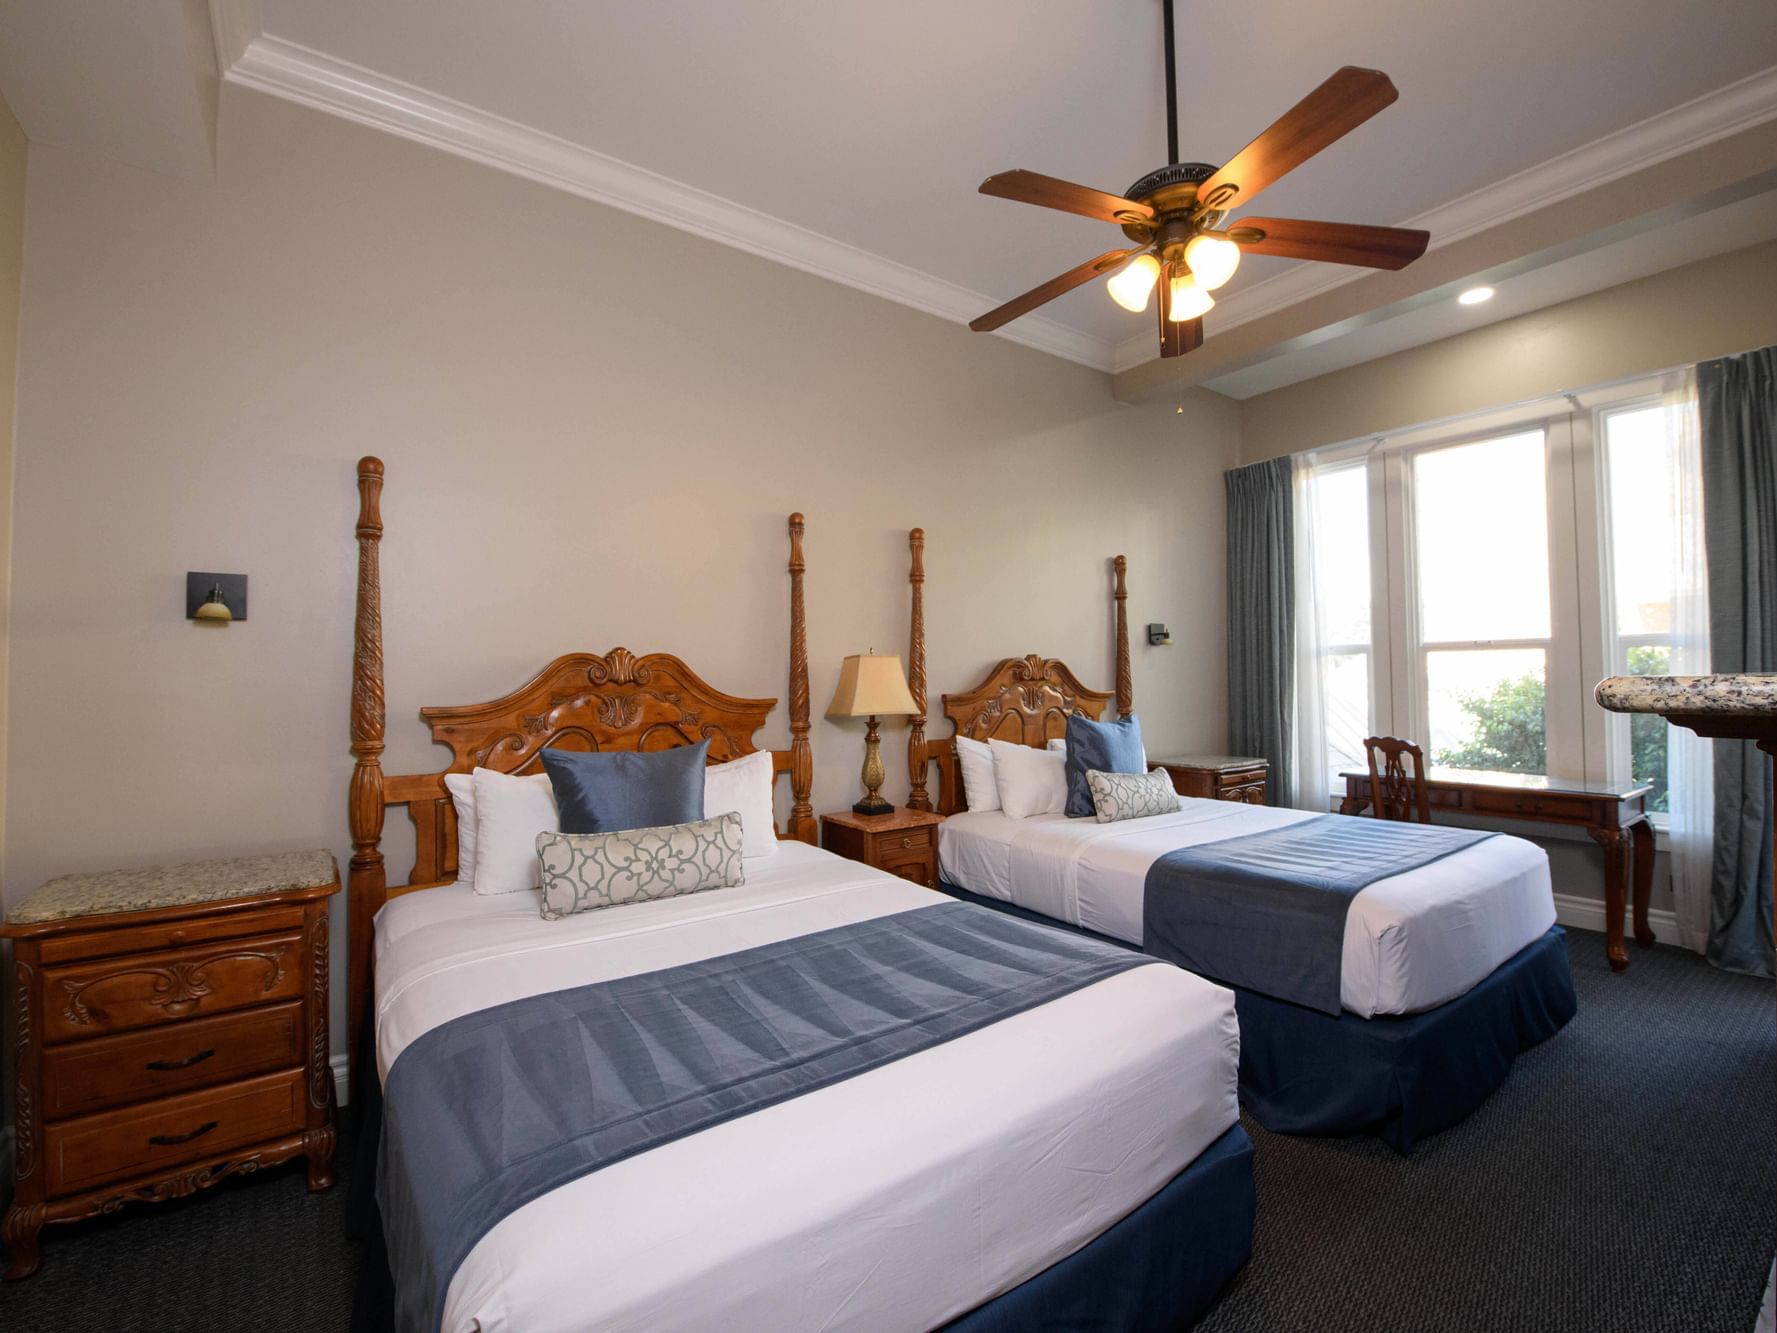 2-Queen Beds & ceiling fan in a room at Horton Grand Hotel